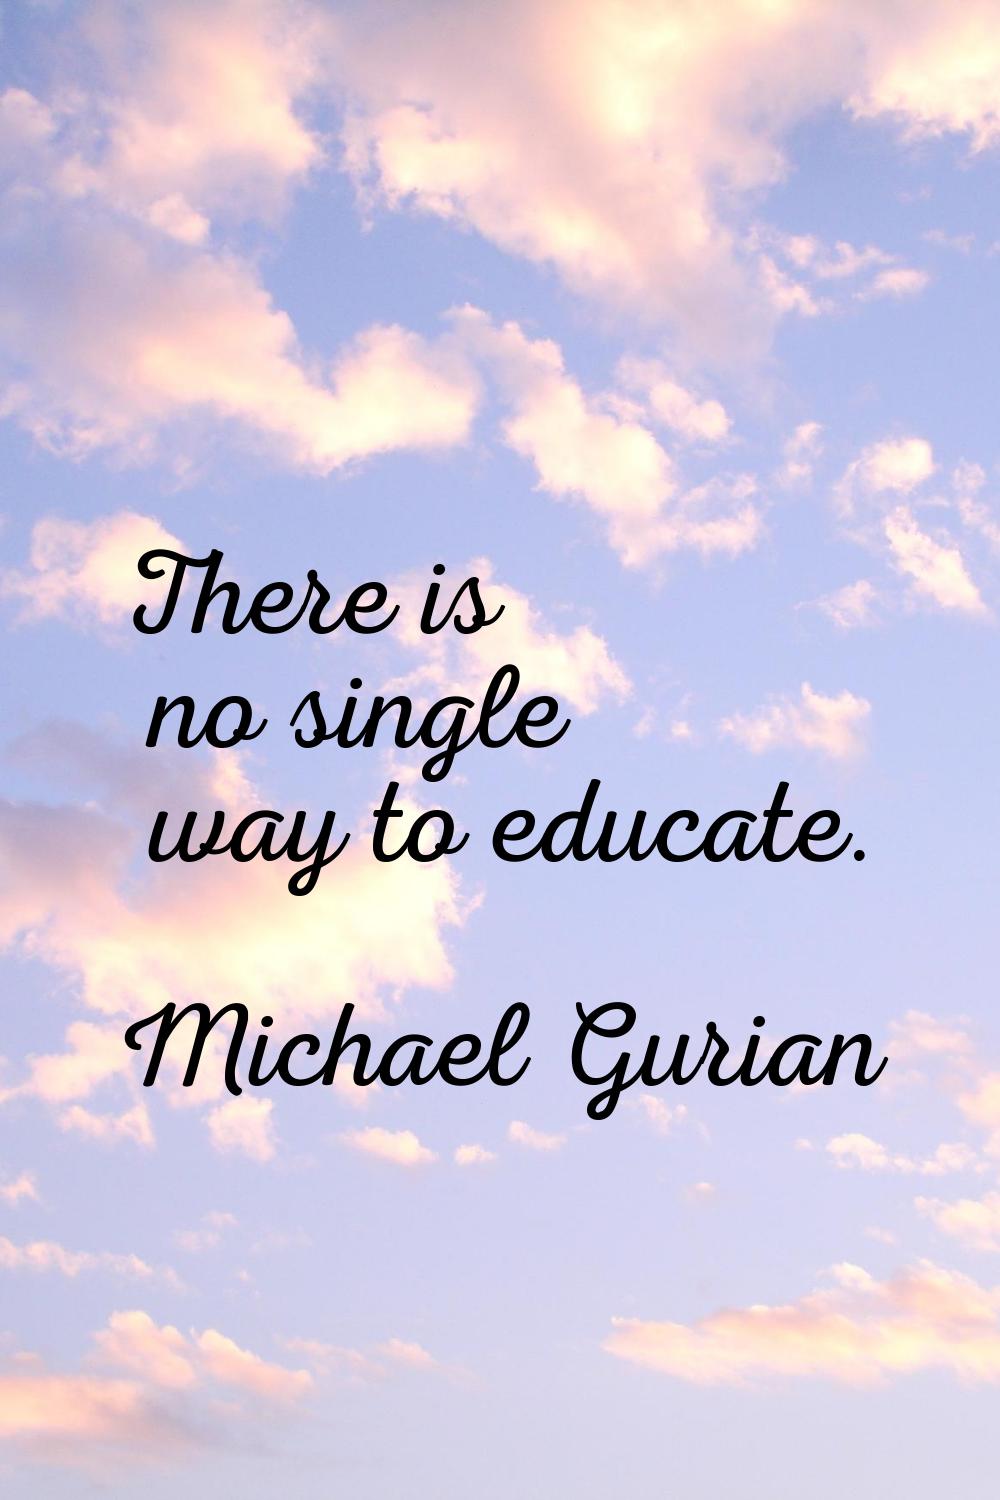 There is no single way to educate.